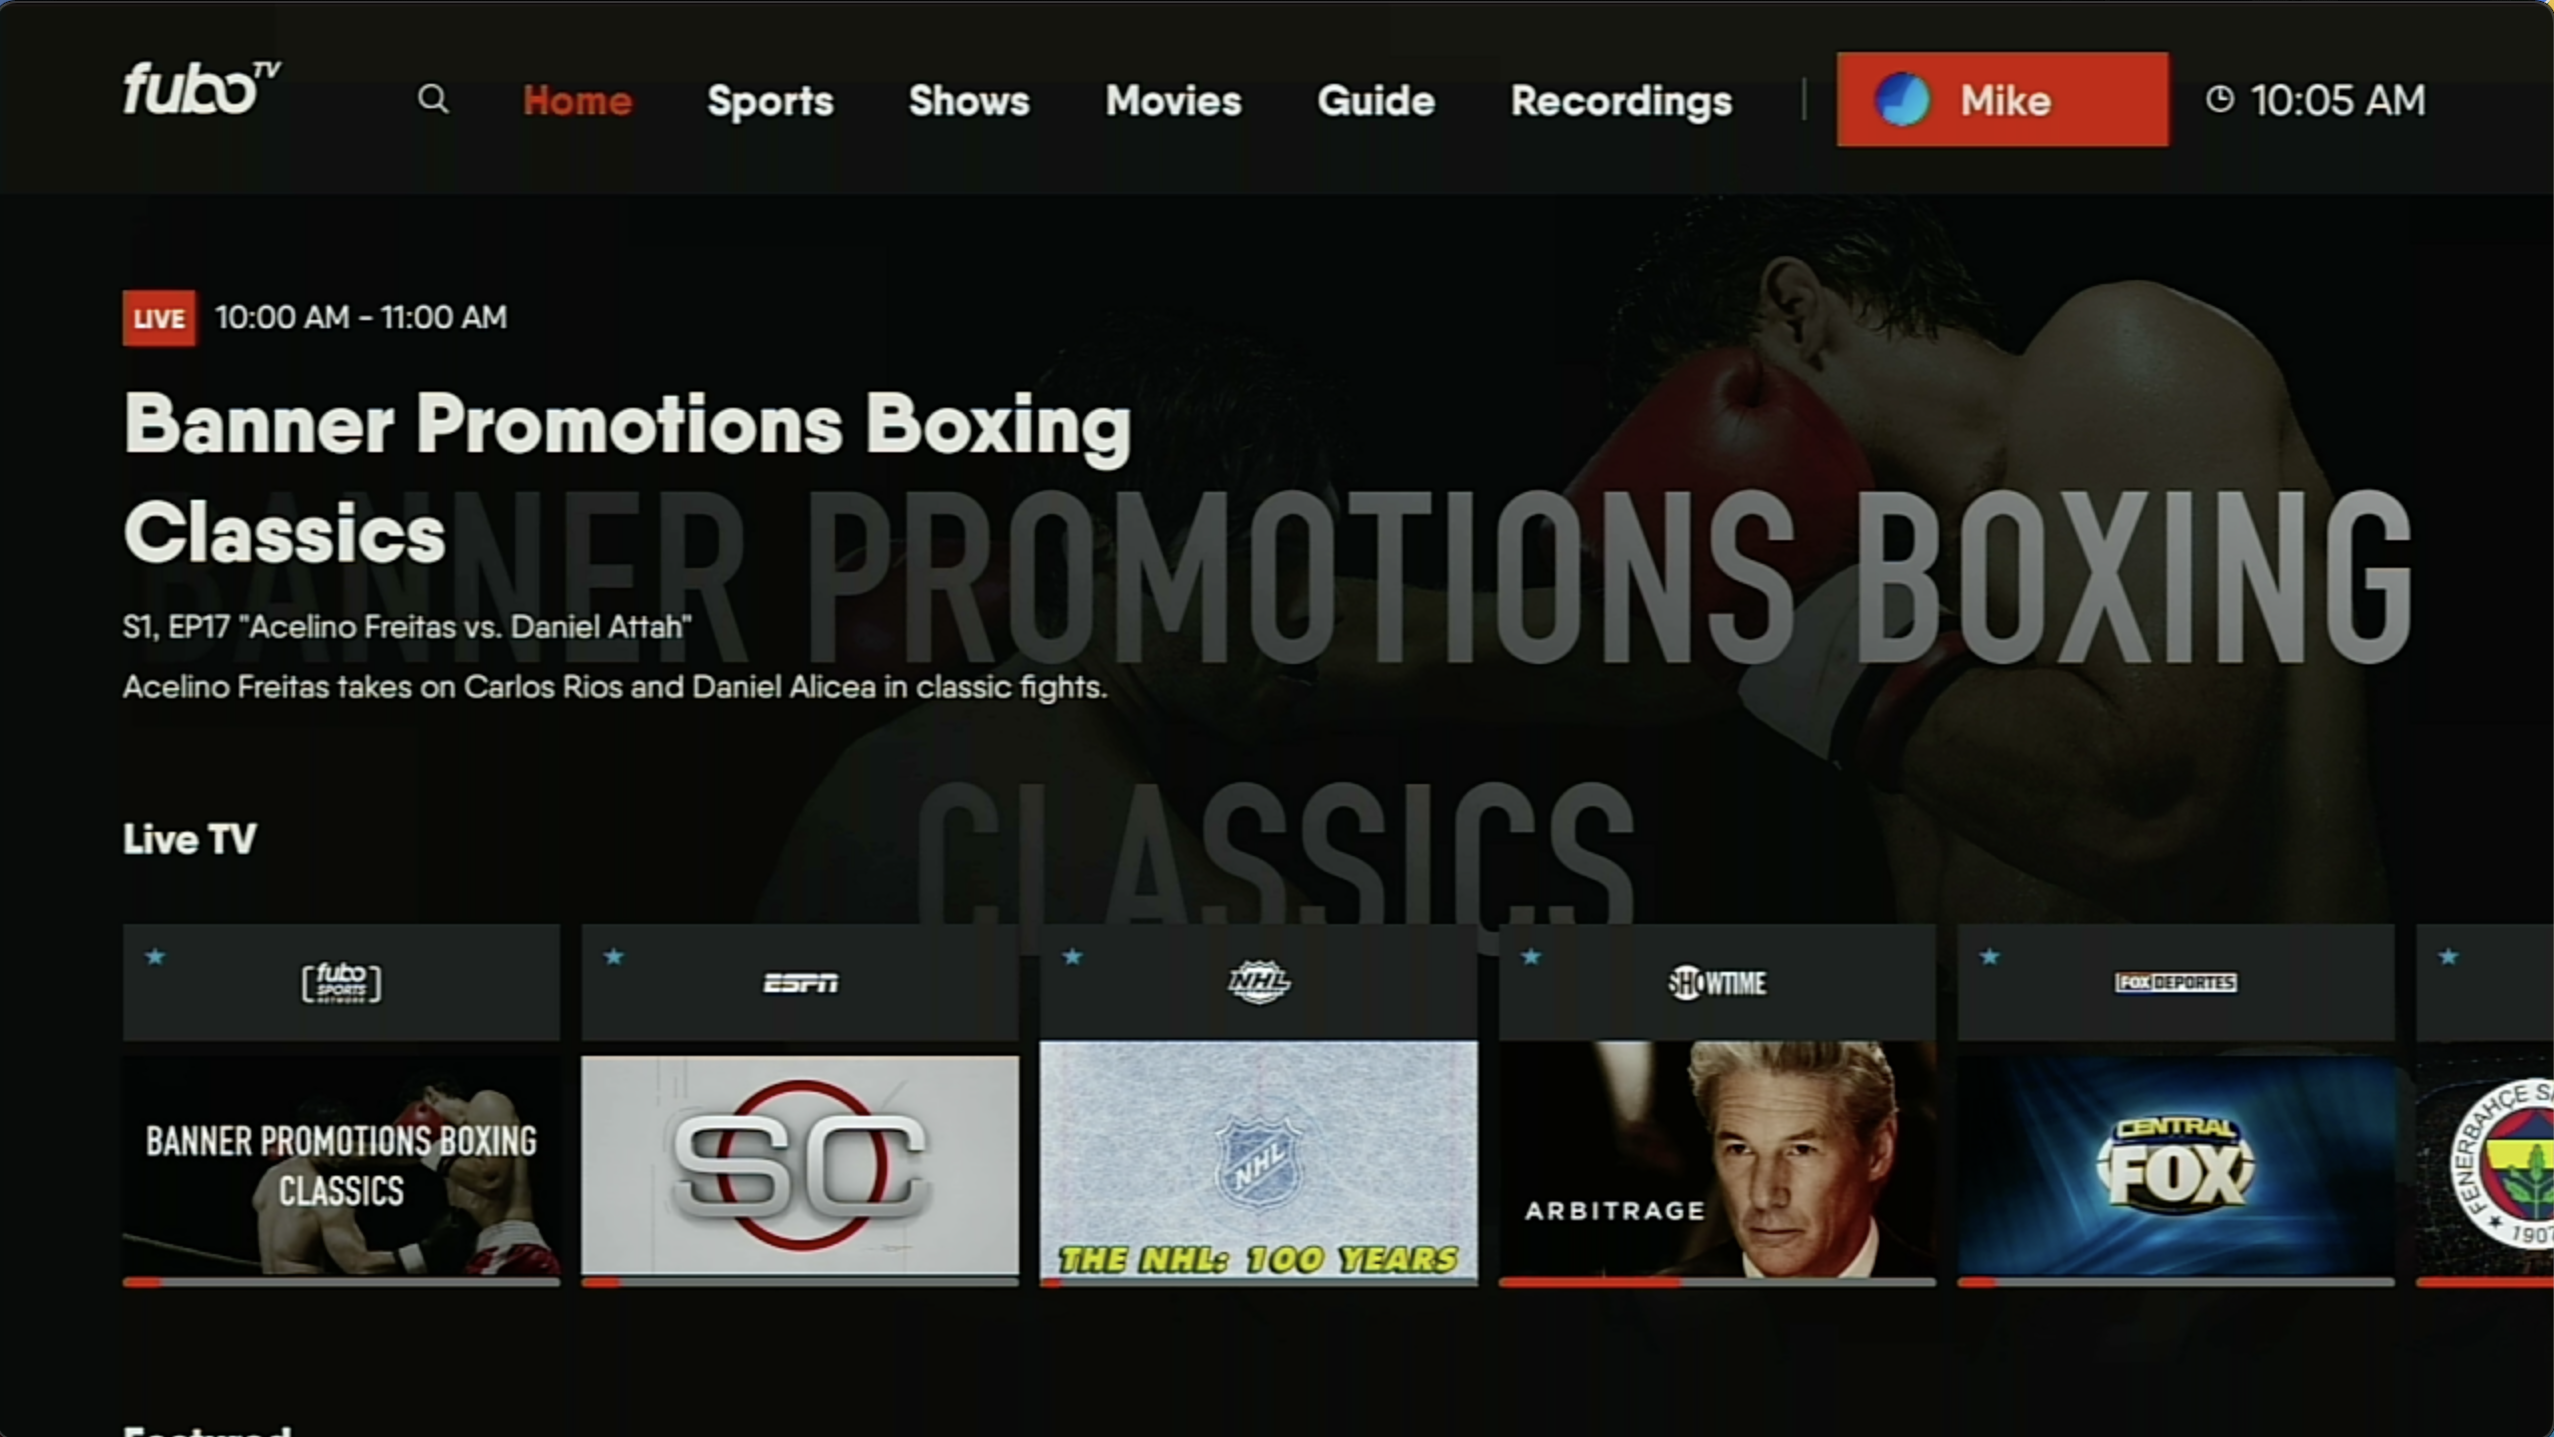 Home screen of the FuboTV app on Amazon Fire TV with the profile name highlighted in the upper-right